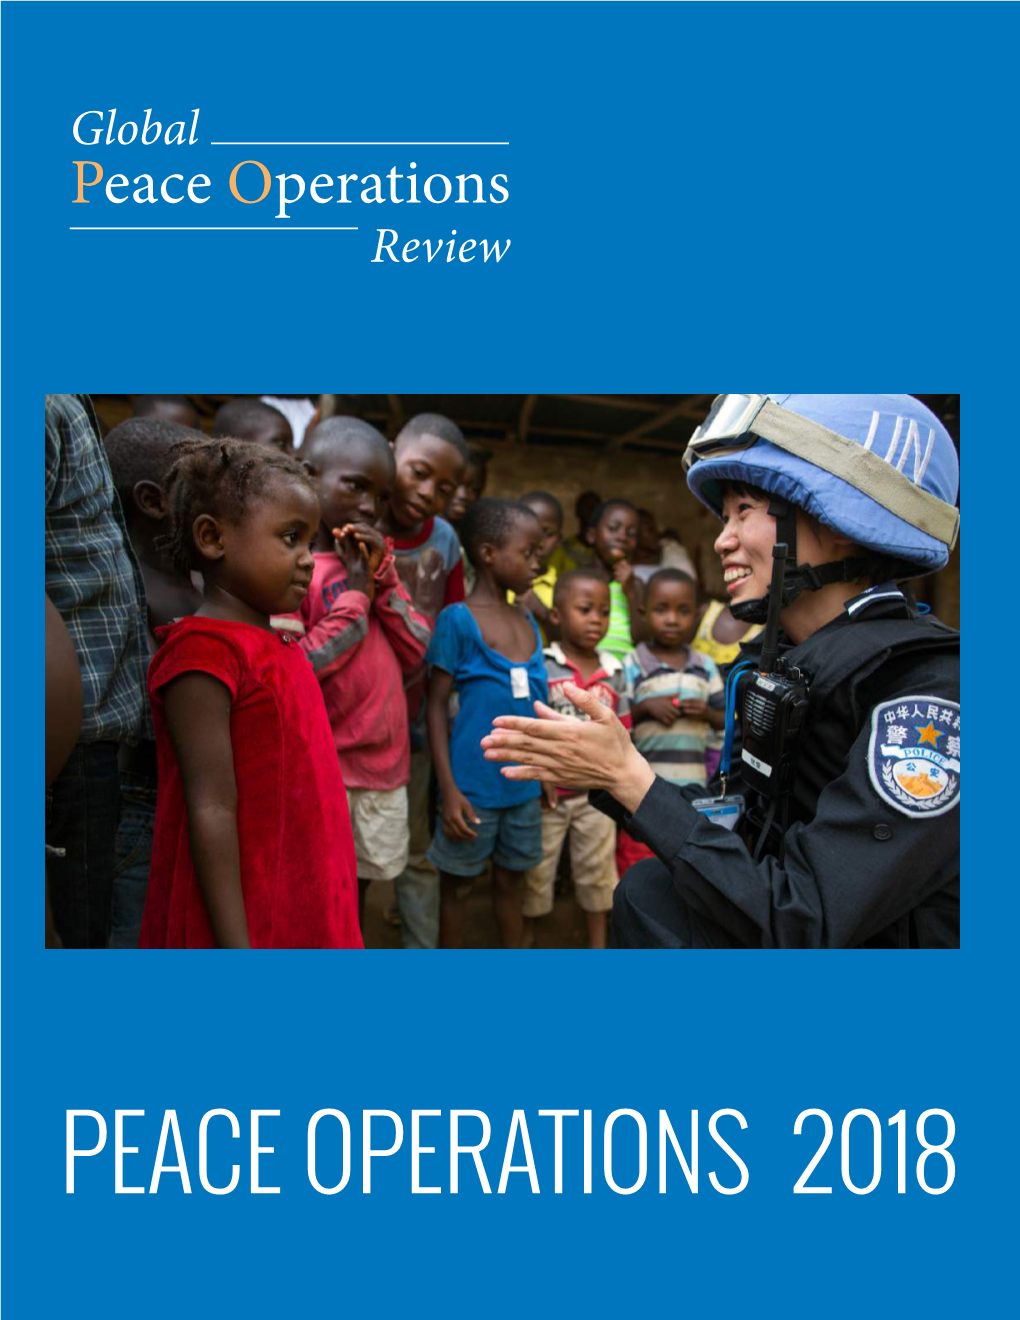 Global Peace Operations 2018: Year in Review